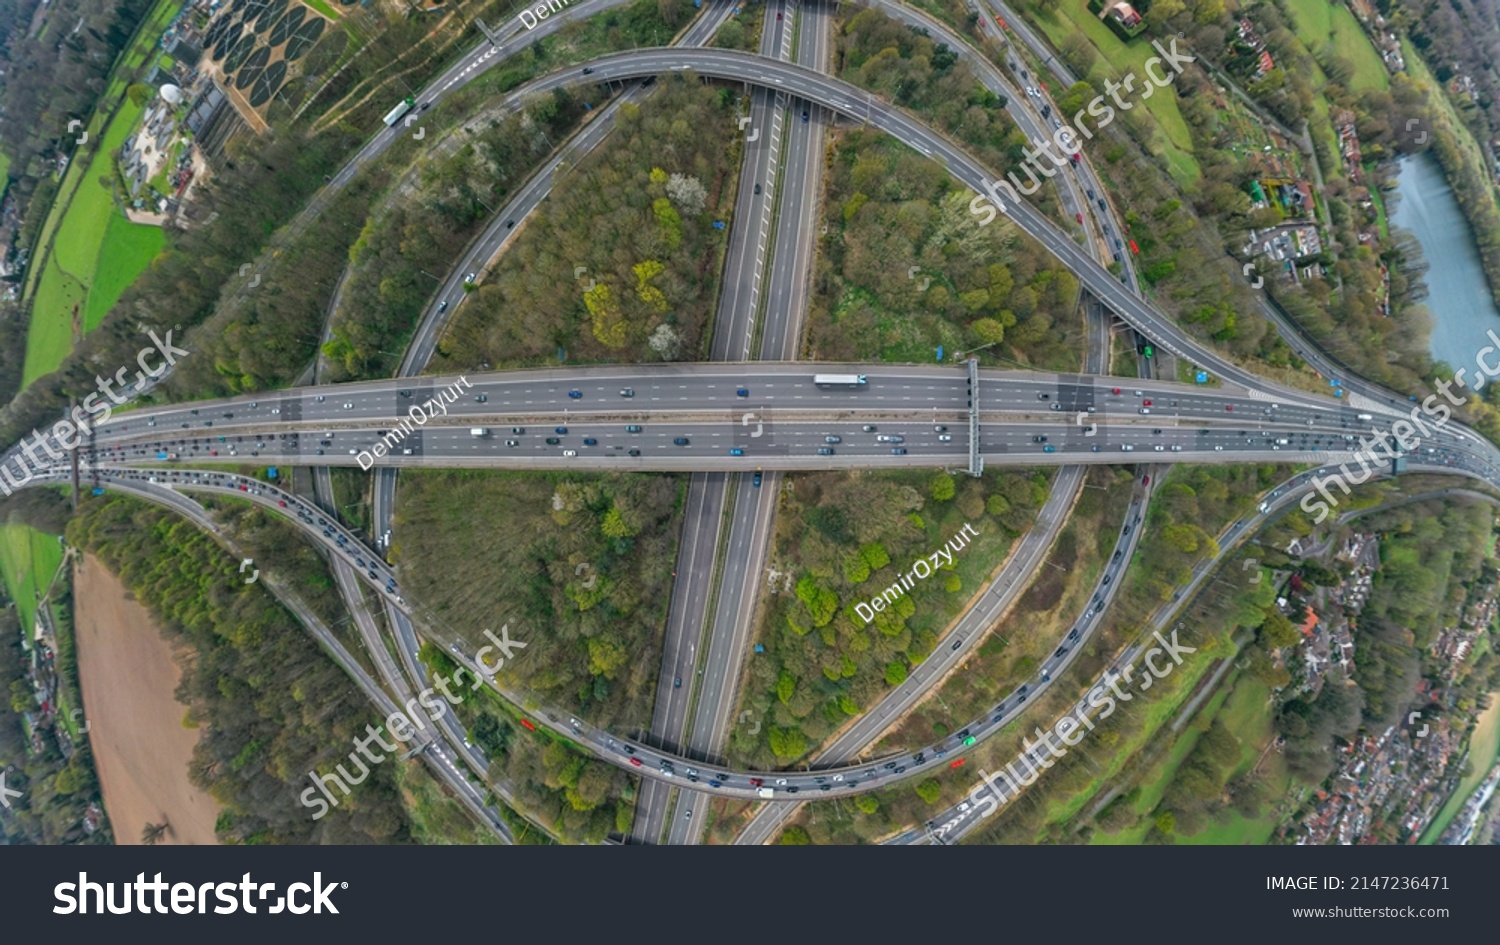 Aerial View Junction Roundabout Roads Wide Stock Photo 2147236471 ...